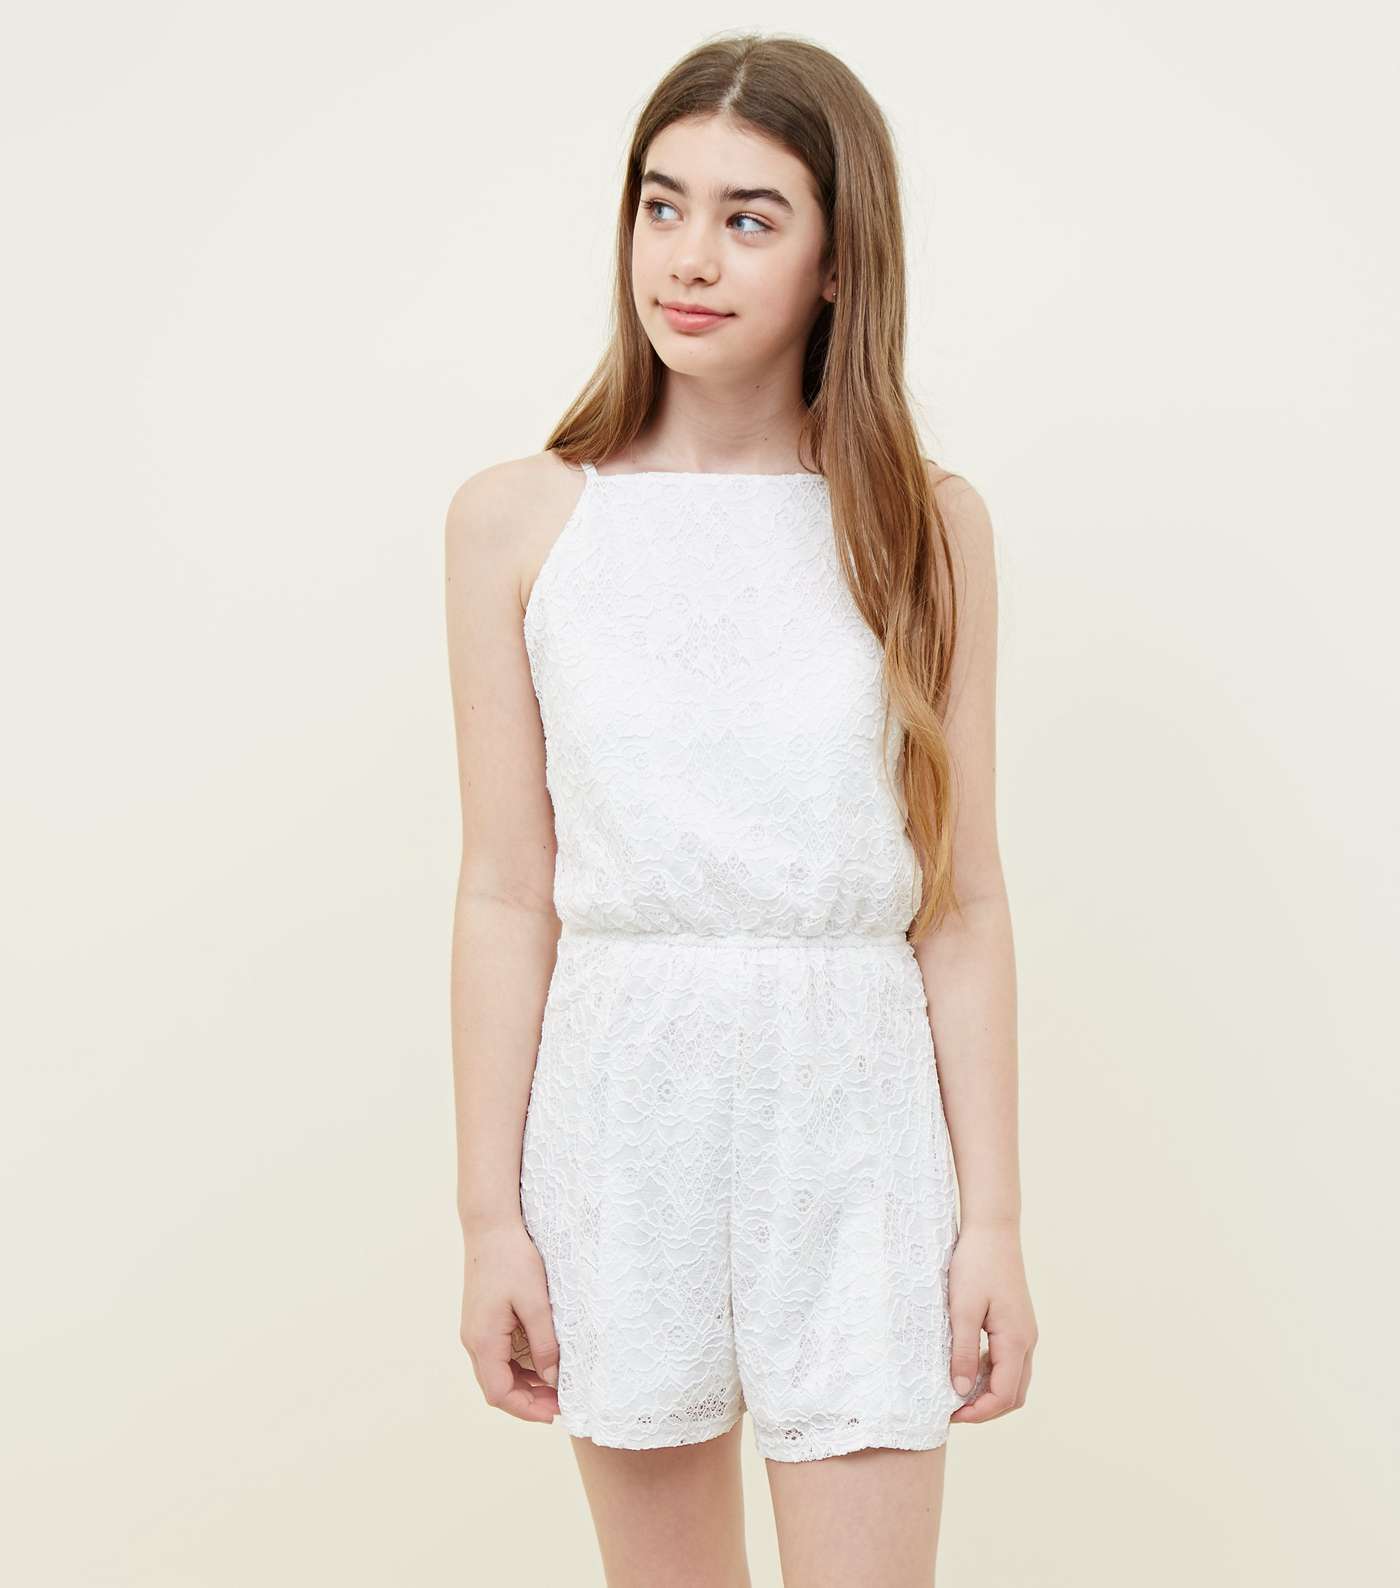 Girls White Lace Playsuit